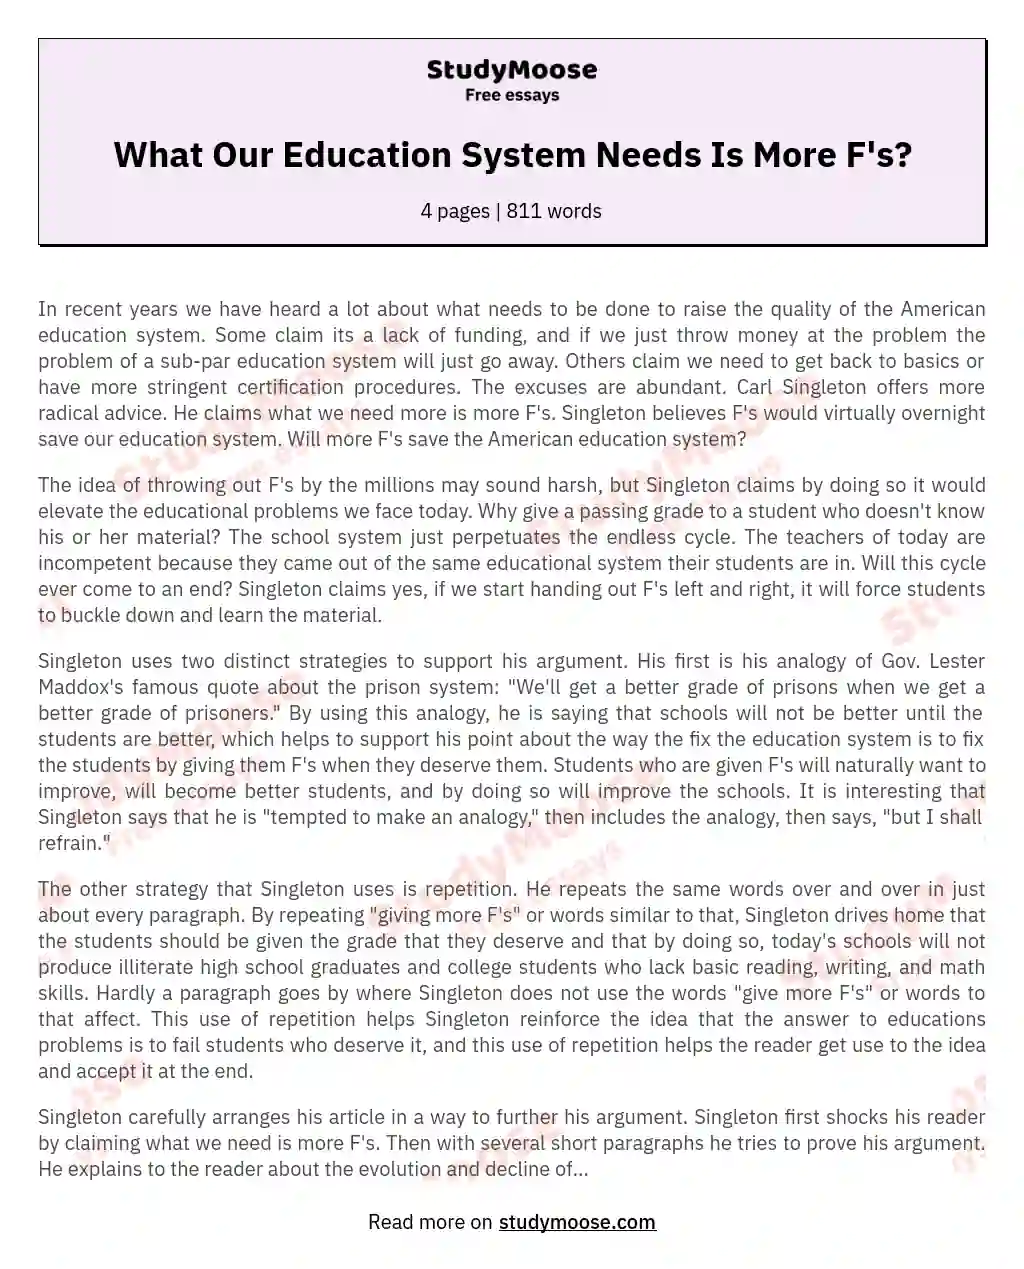 What Our Education System Needs Is More F's? essay